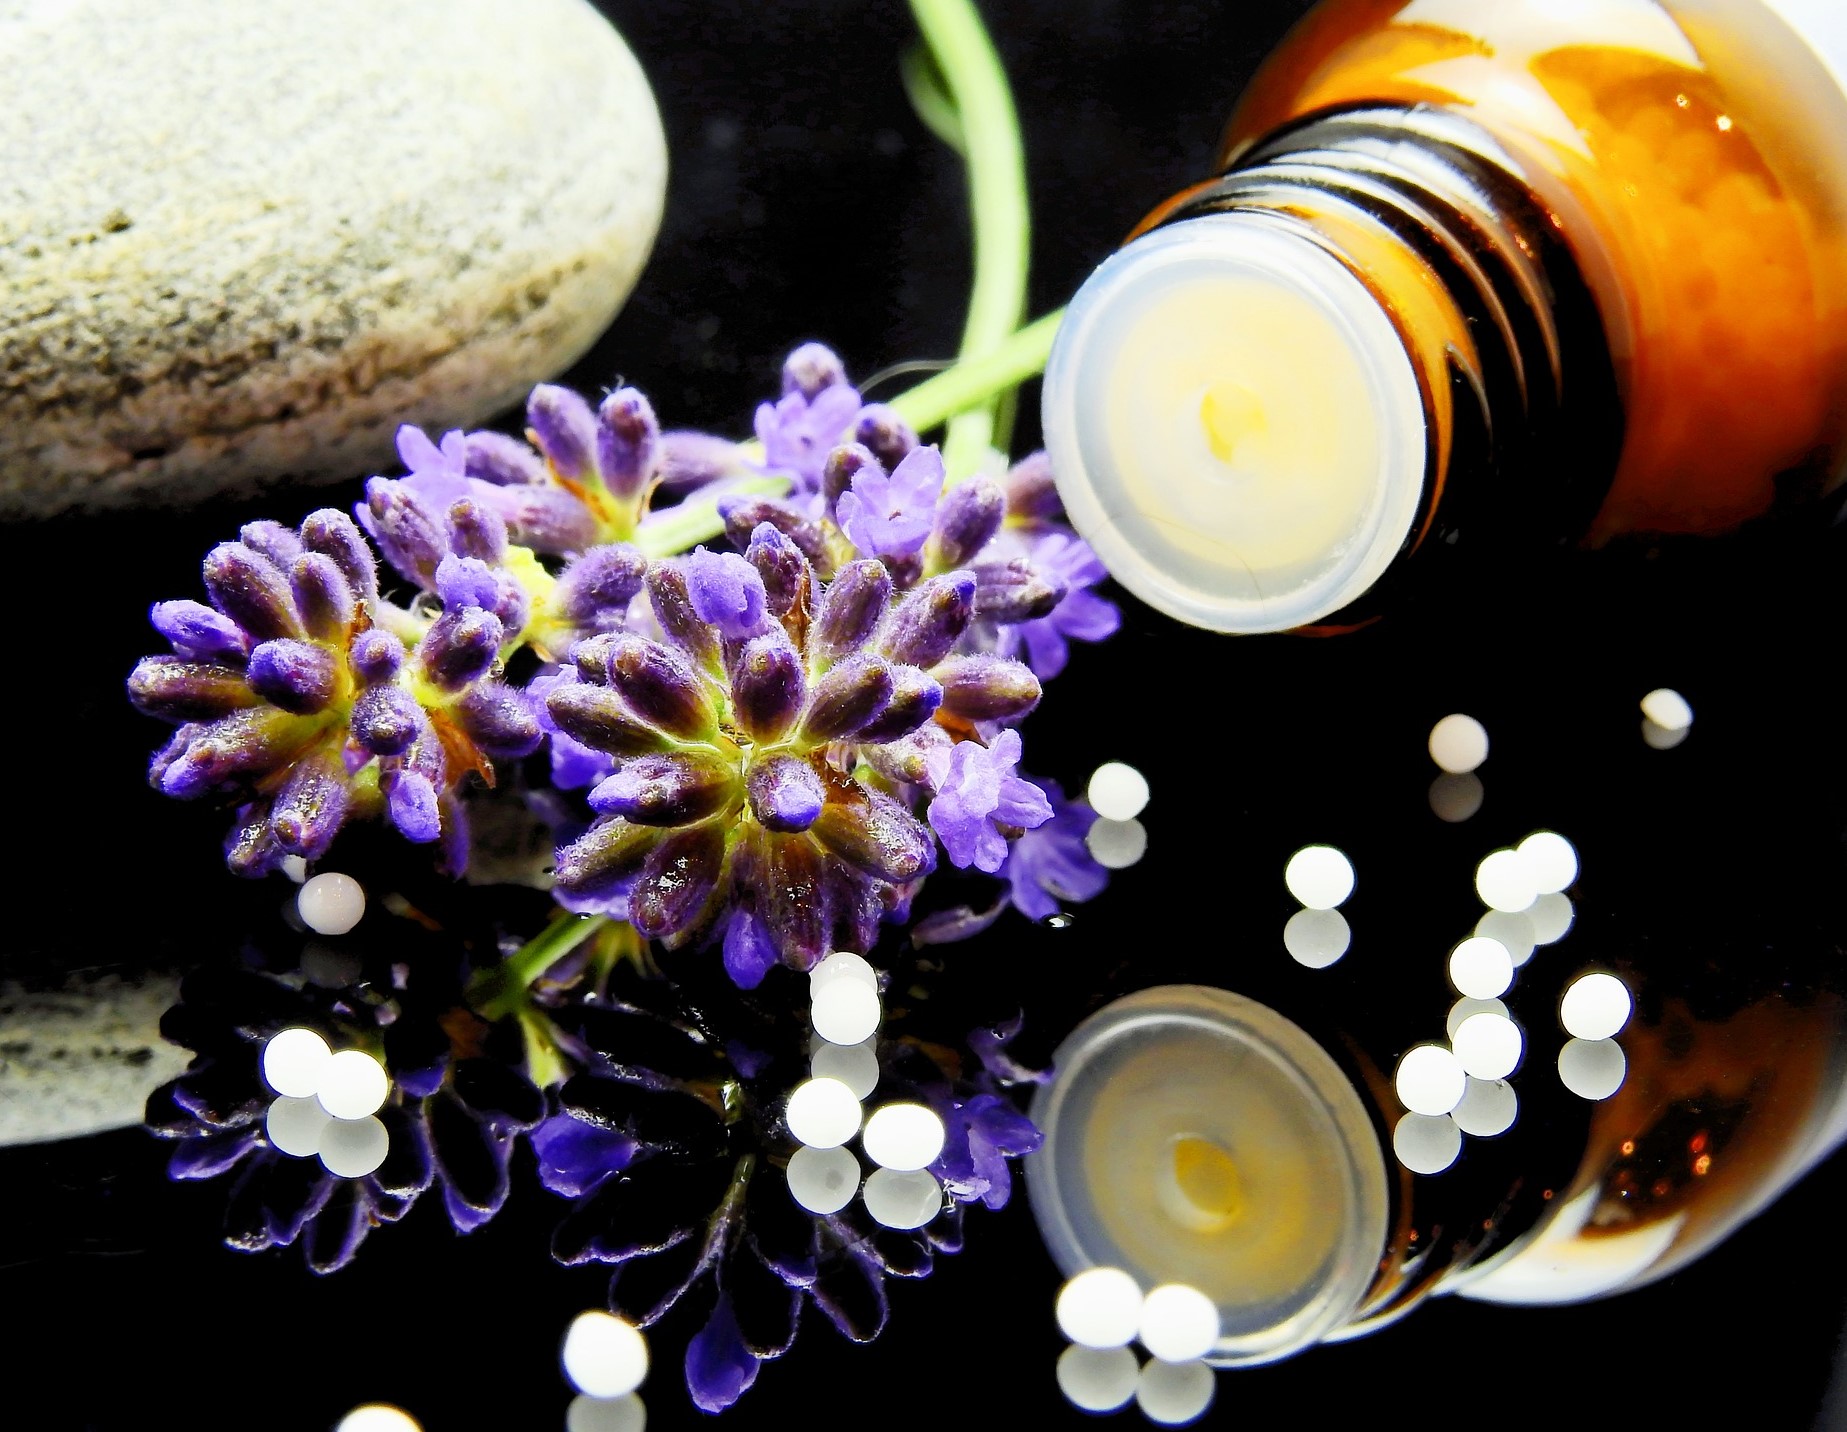 Basic International Classical Homeopathy Course